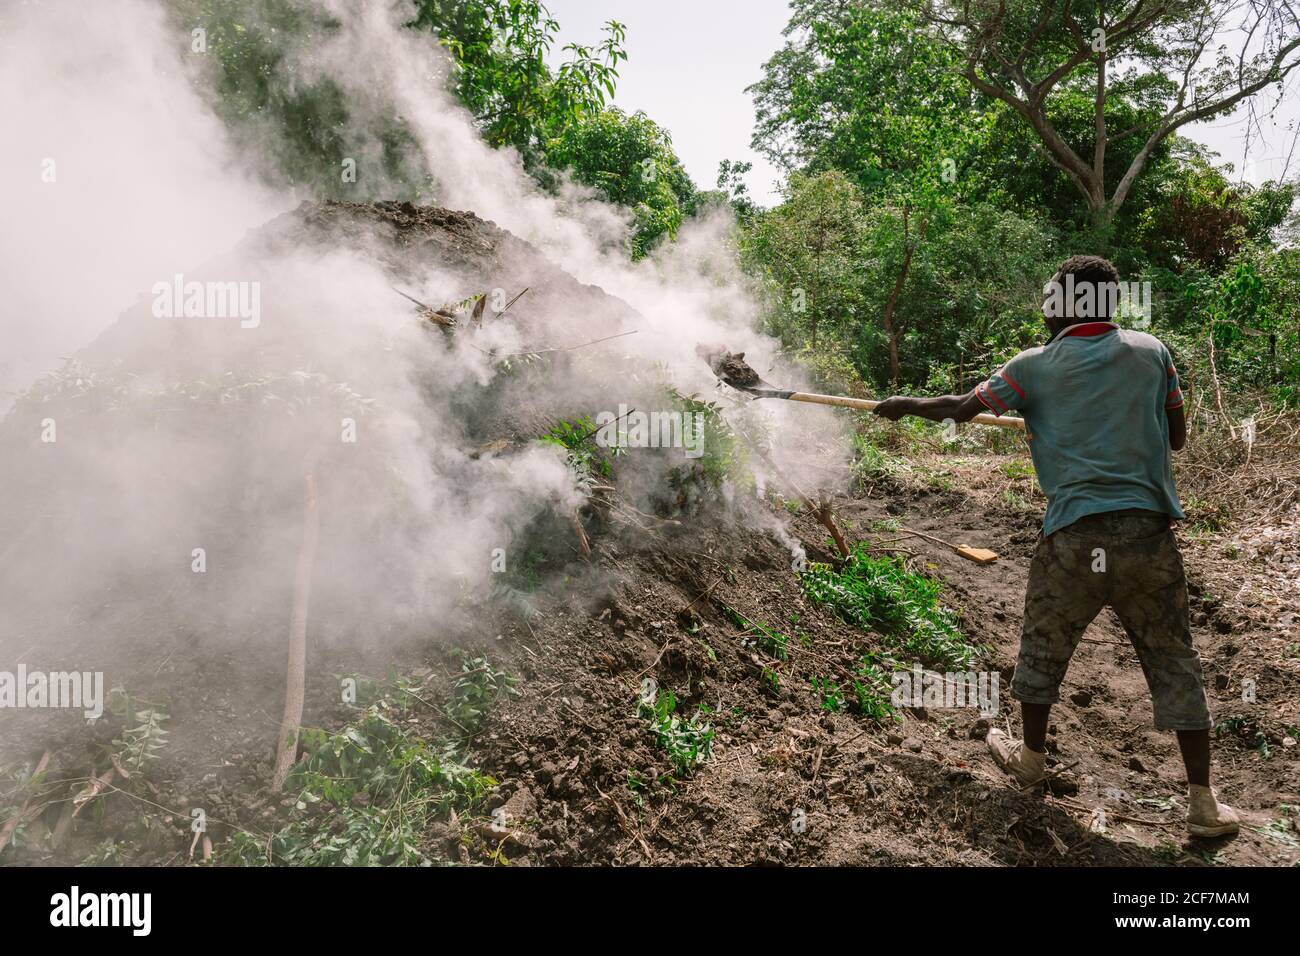 Gambia, Africa - August 4, 2019: Back view of black hardworking man throwing ground with shovel on steaming natural mound in forest Stock Photo